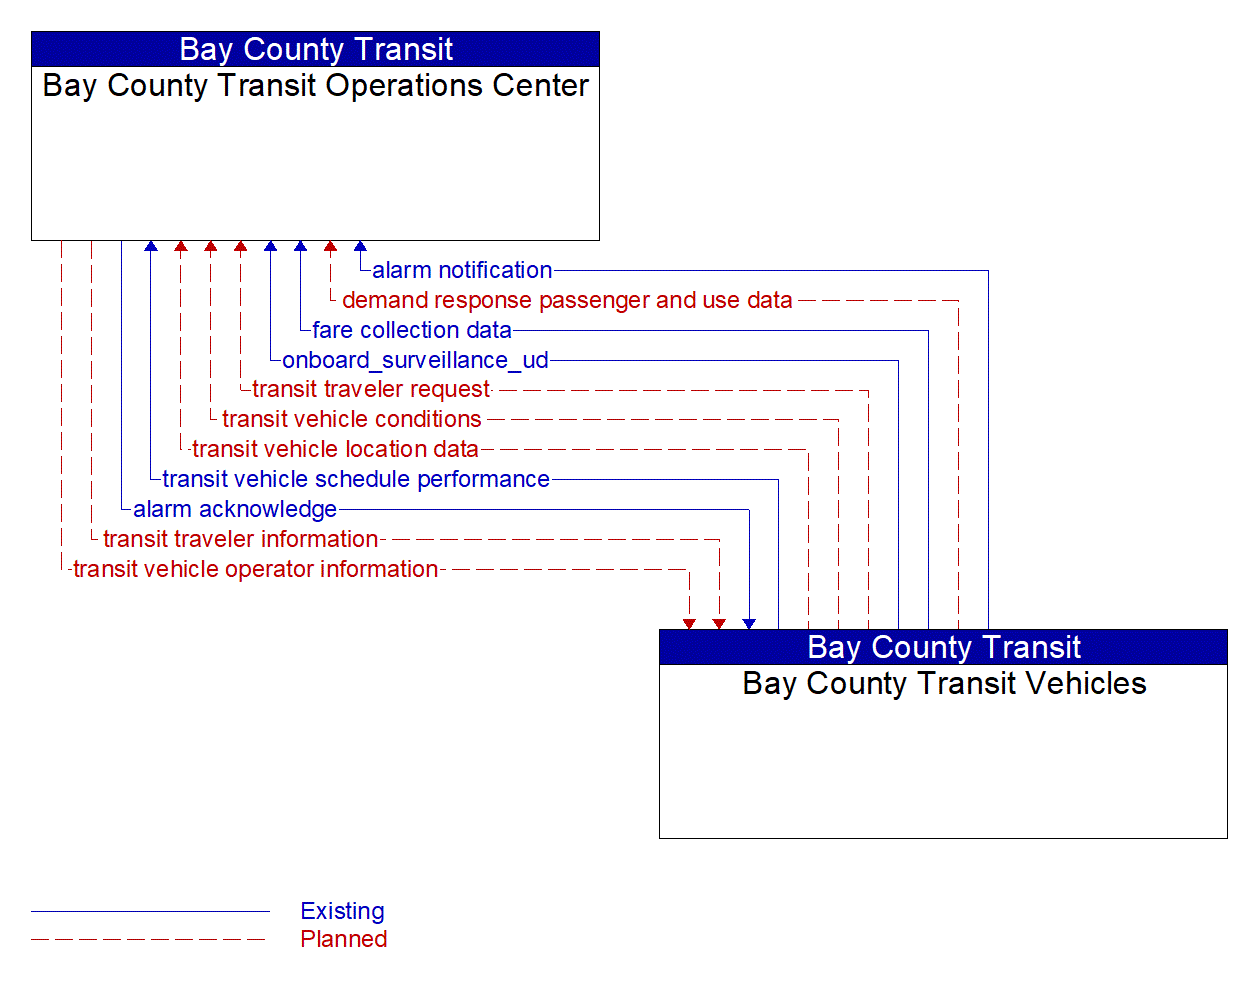 Architecture Flow Diagram: Bay County Transit Vehicles <--> Bay County Transit Operations Center